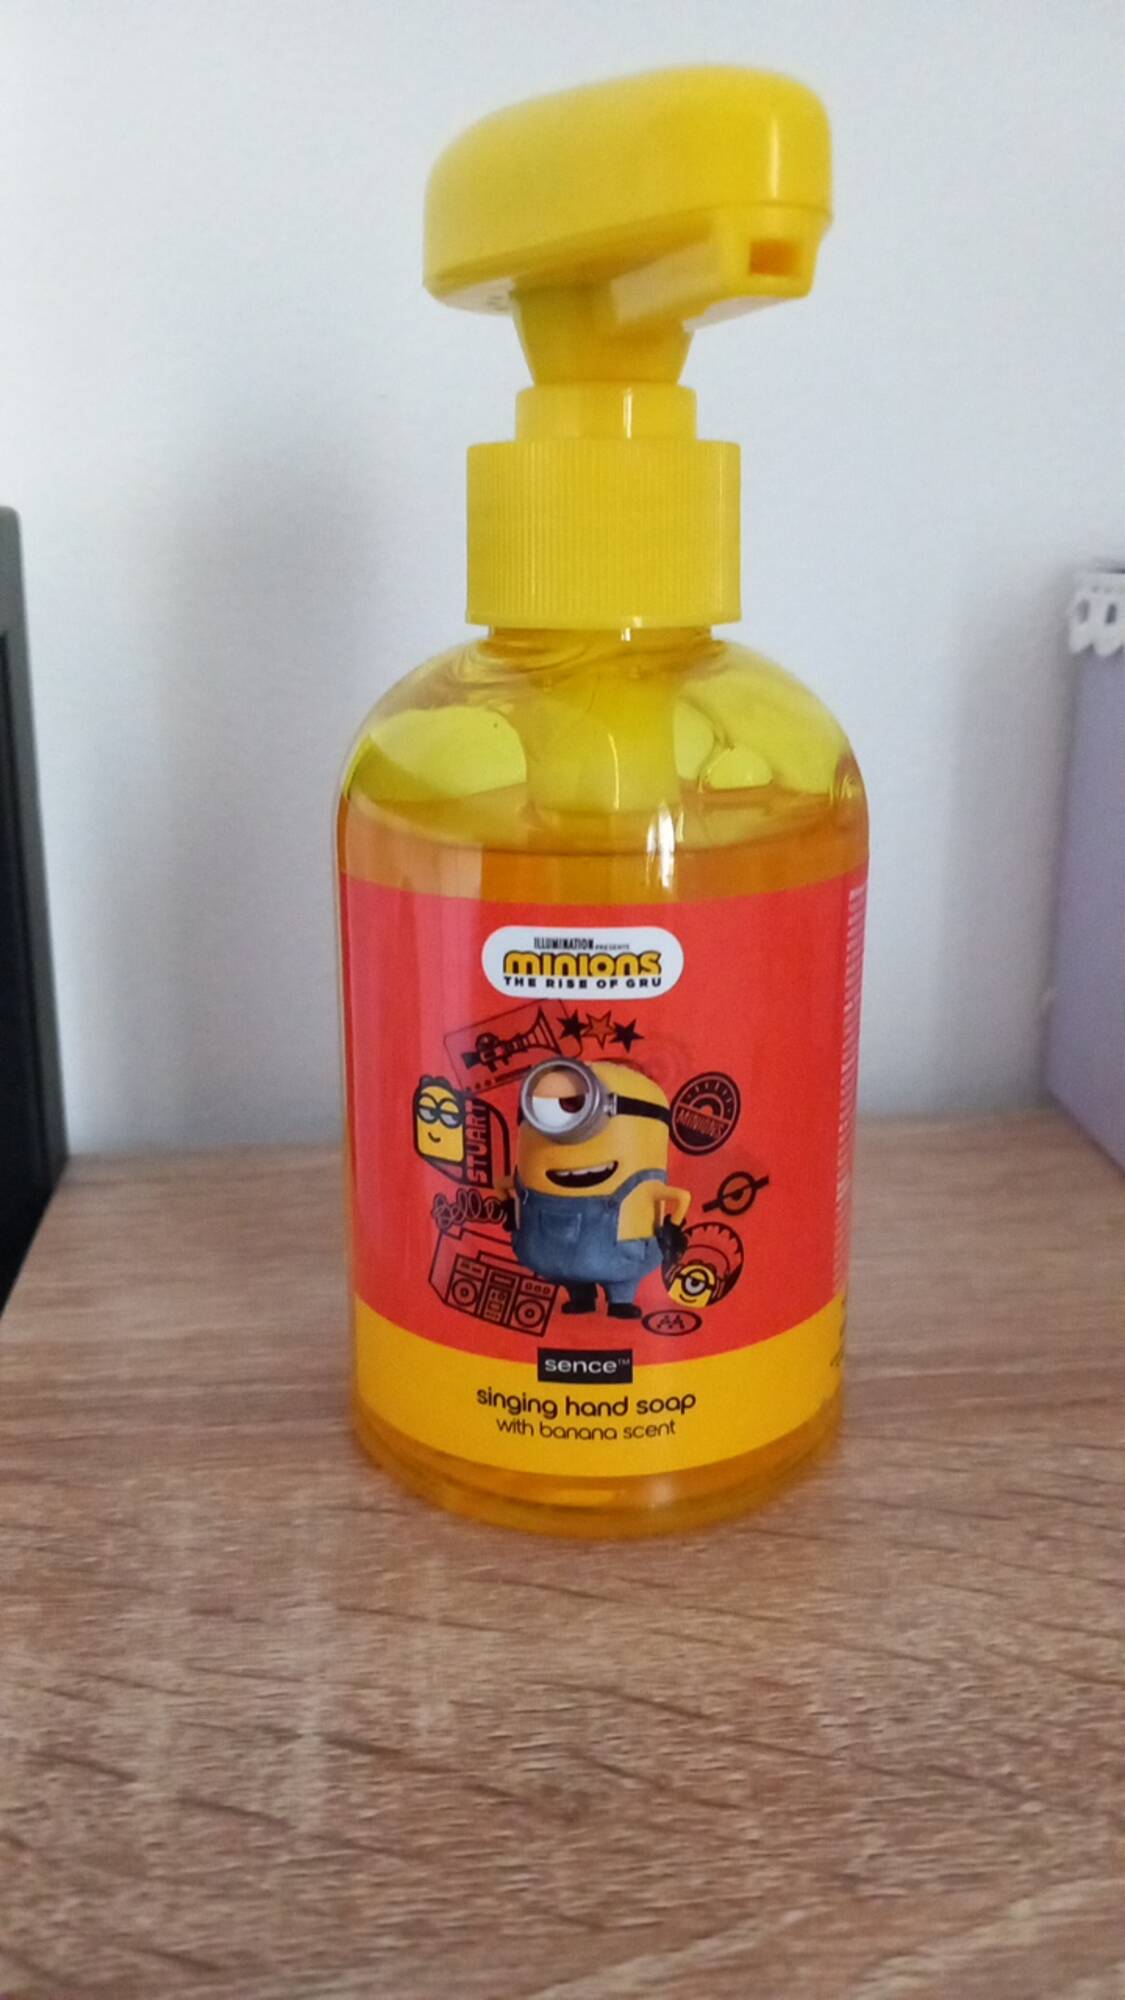 SENCE - Minions the rise of gru - Singing hand soap